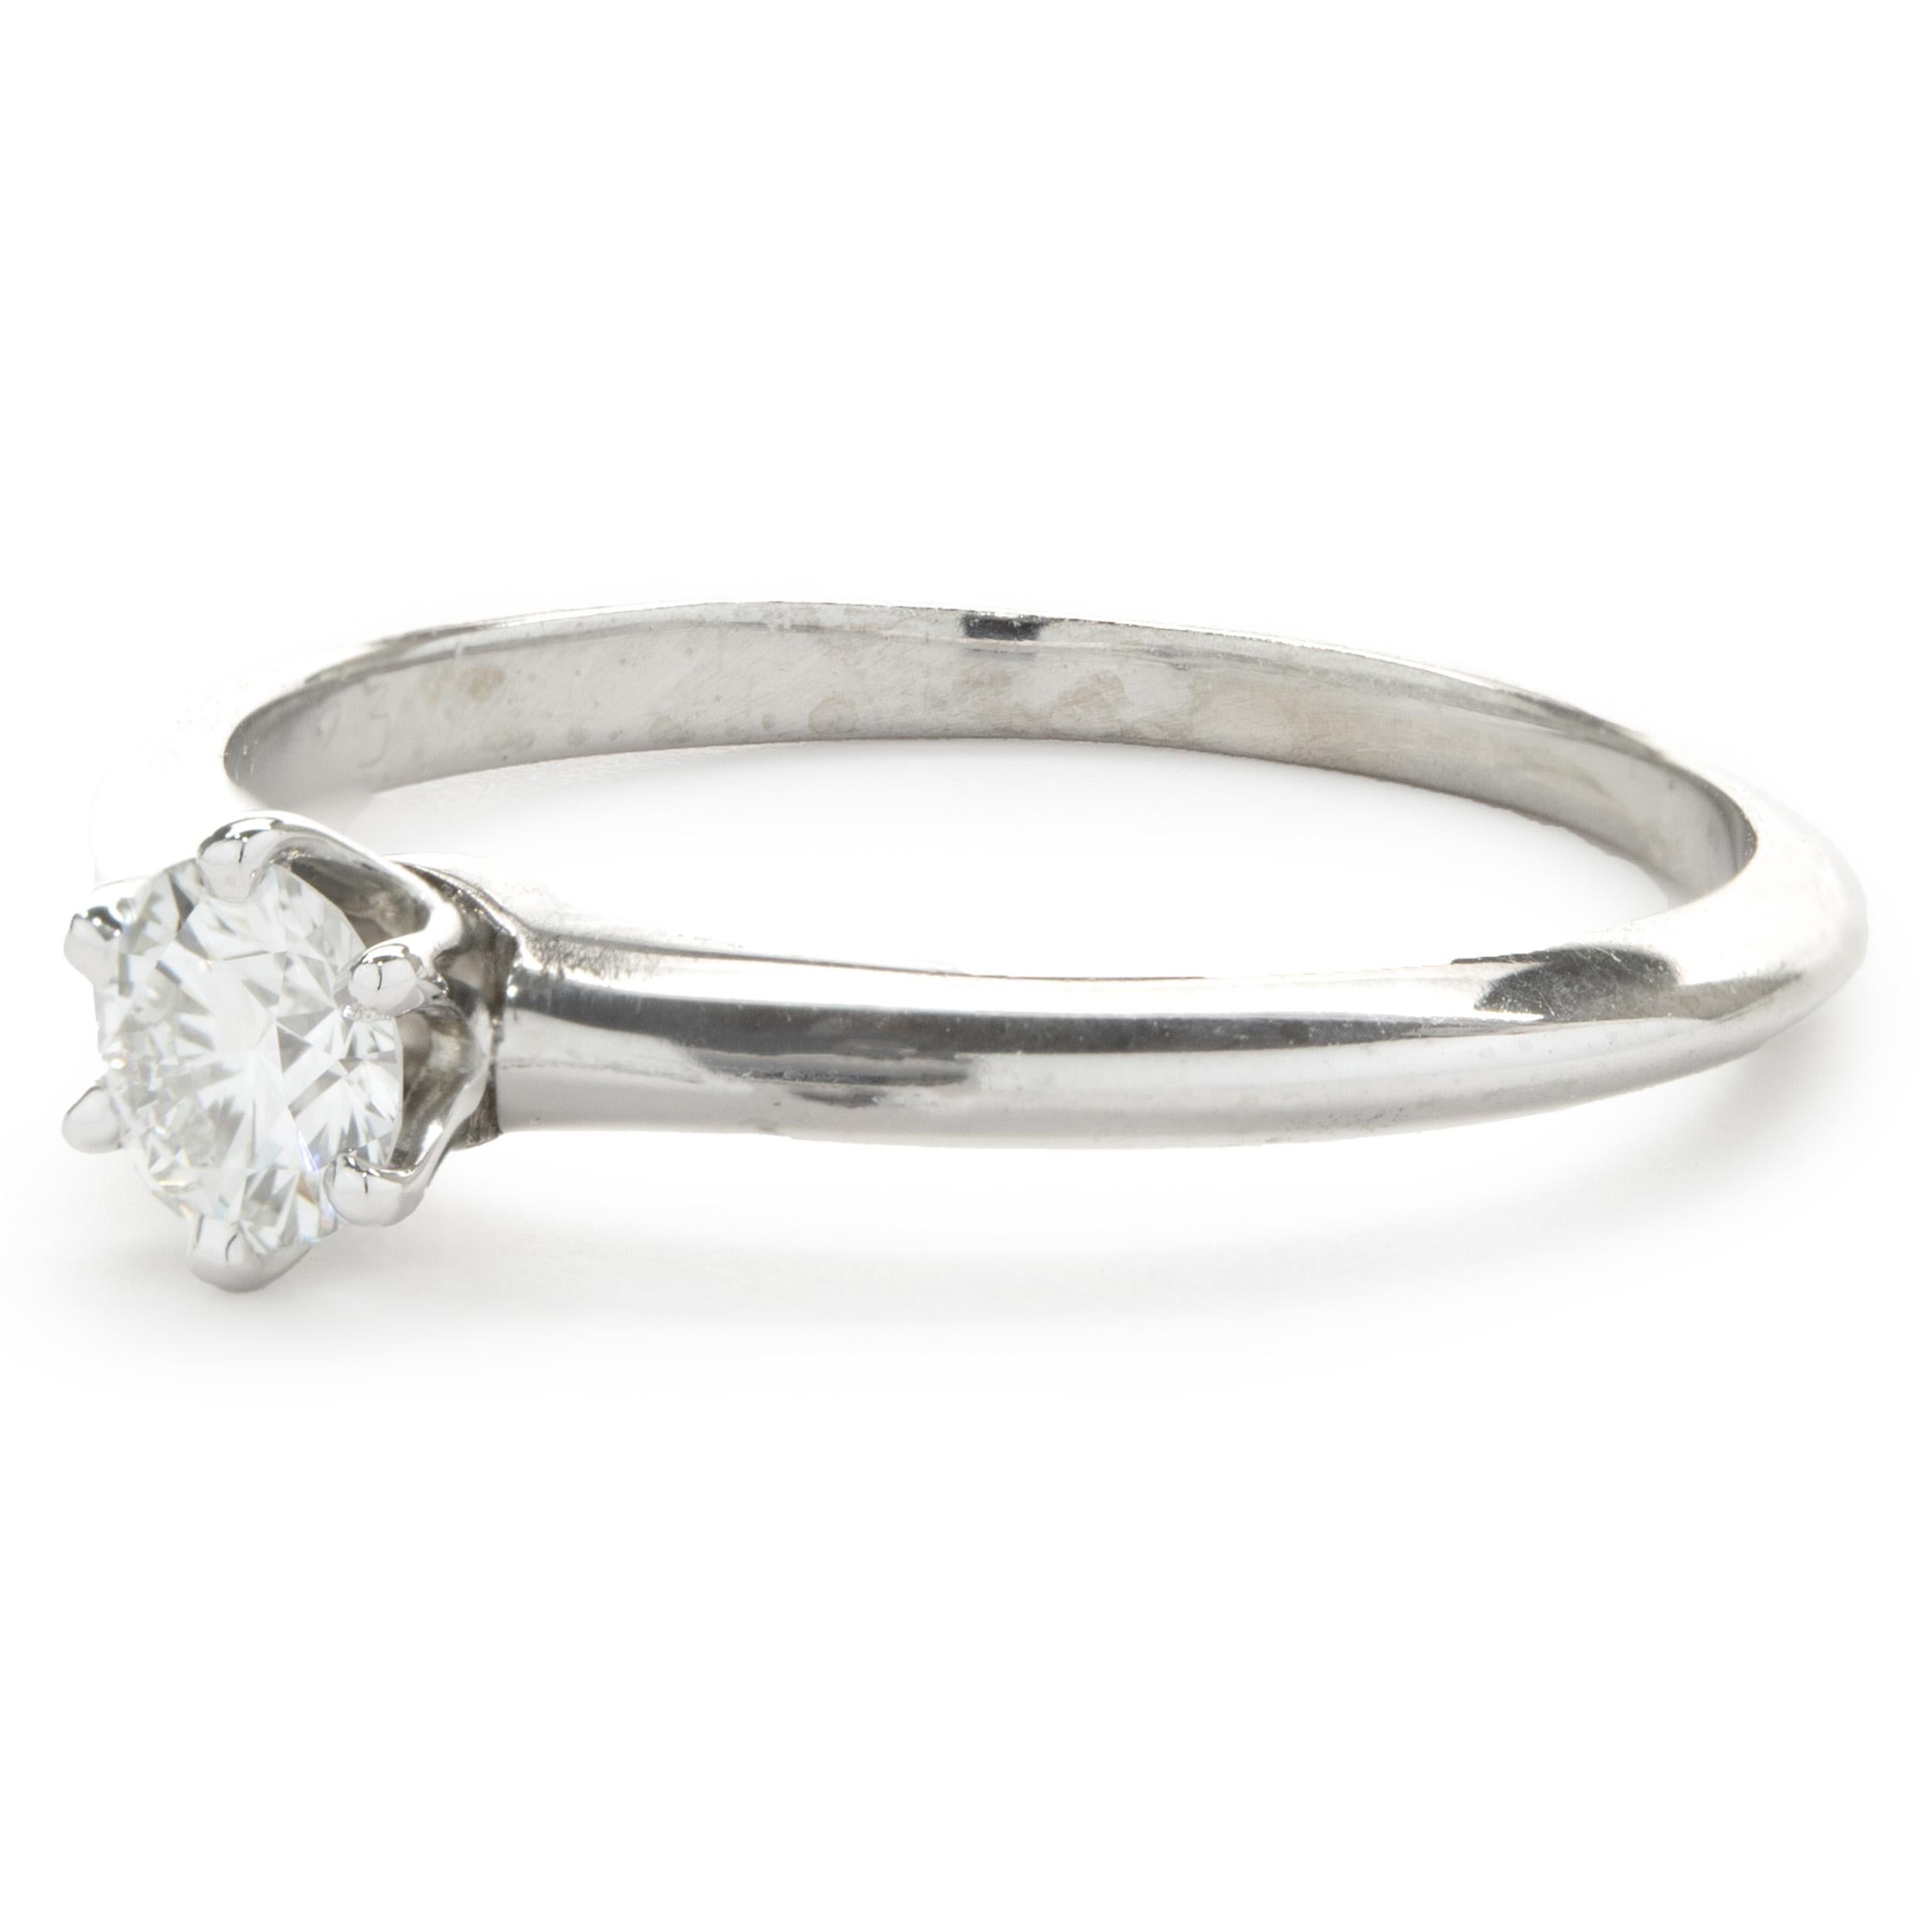 Designer: Tiffany & Co. 
Material: platinum
Diamond: 1 round brilliant cut = 0.23ct
Color: F
Clarity: VS1
Size: 5.5 (complimentary sizing available)
Dimensions: ring top measures 4.80mm wide
Weight: 2.60 grams